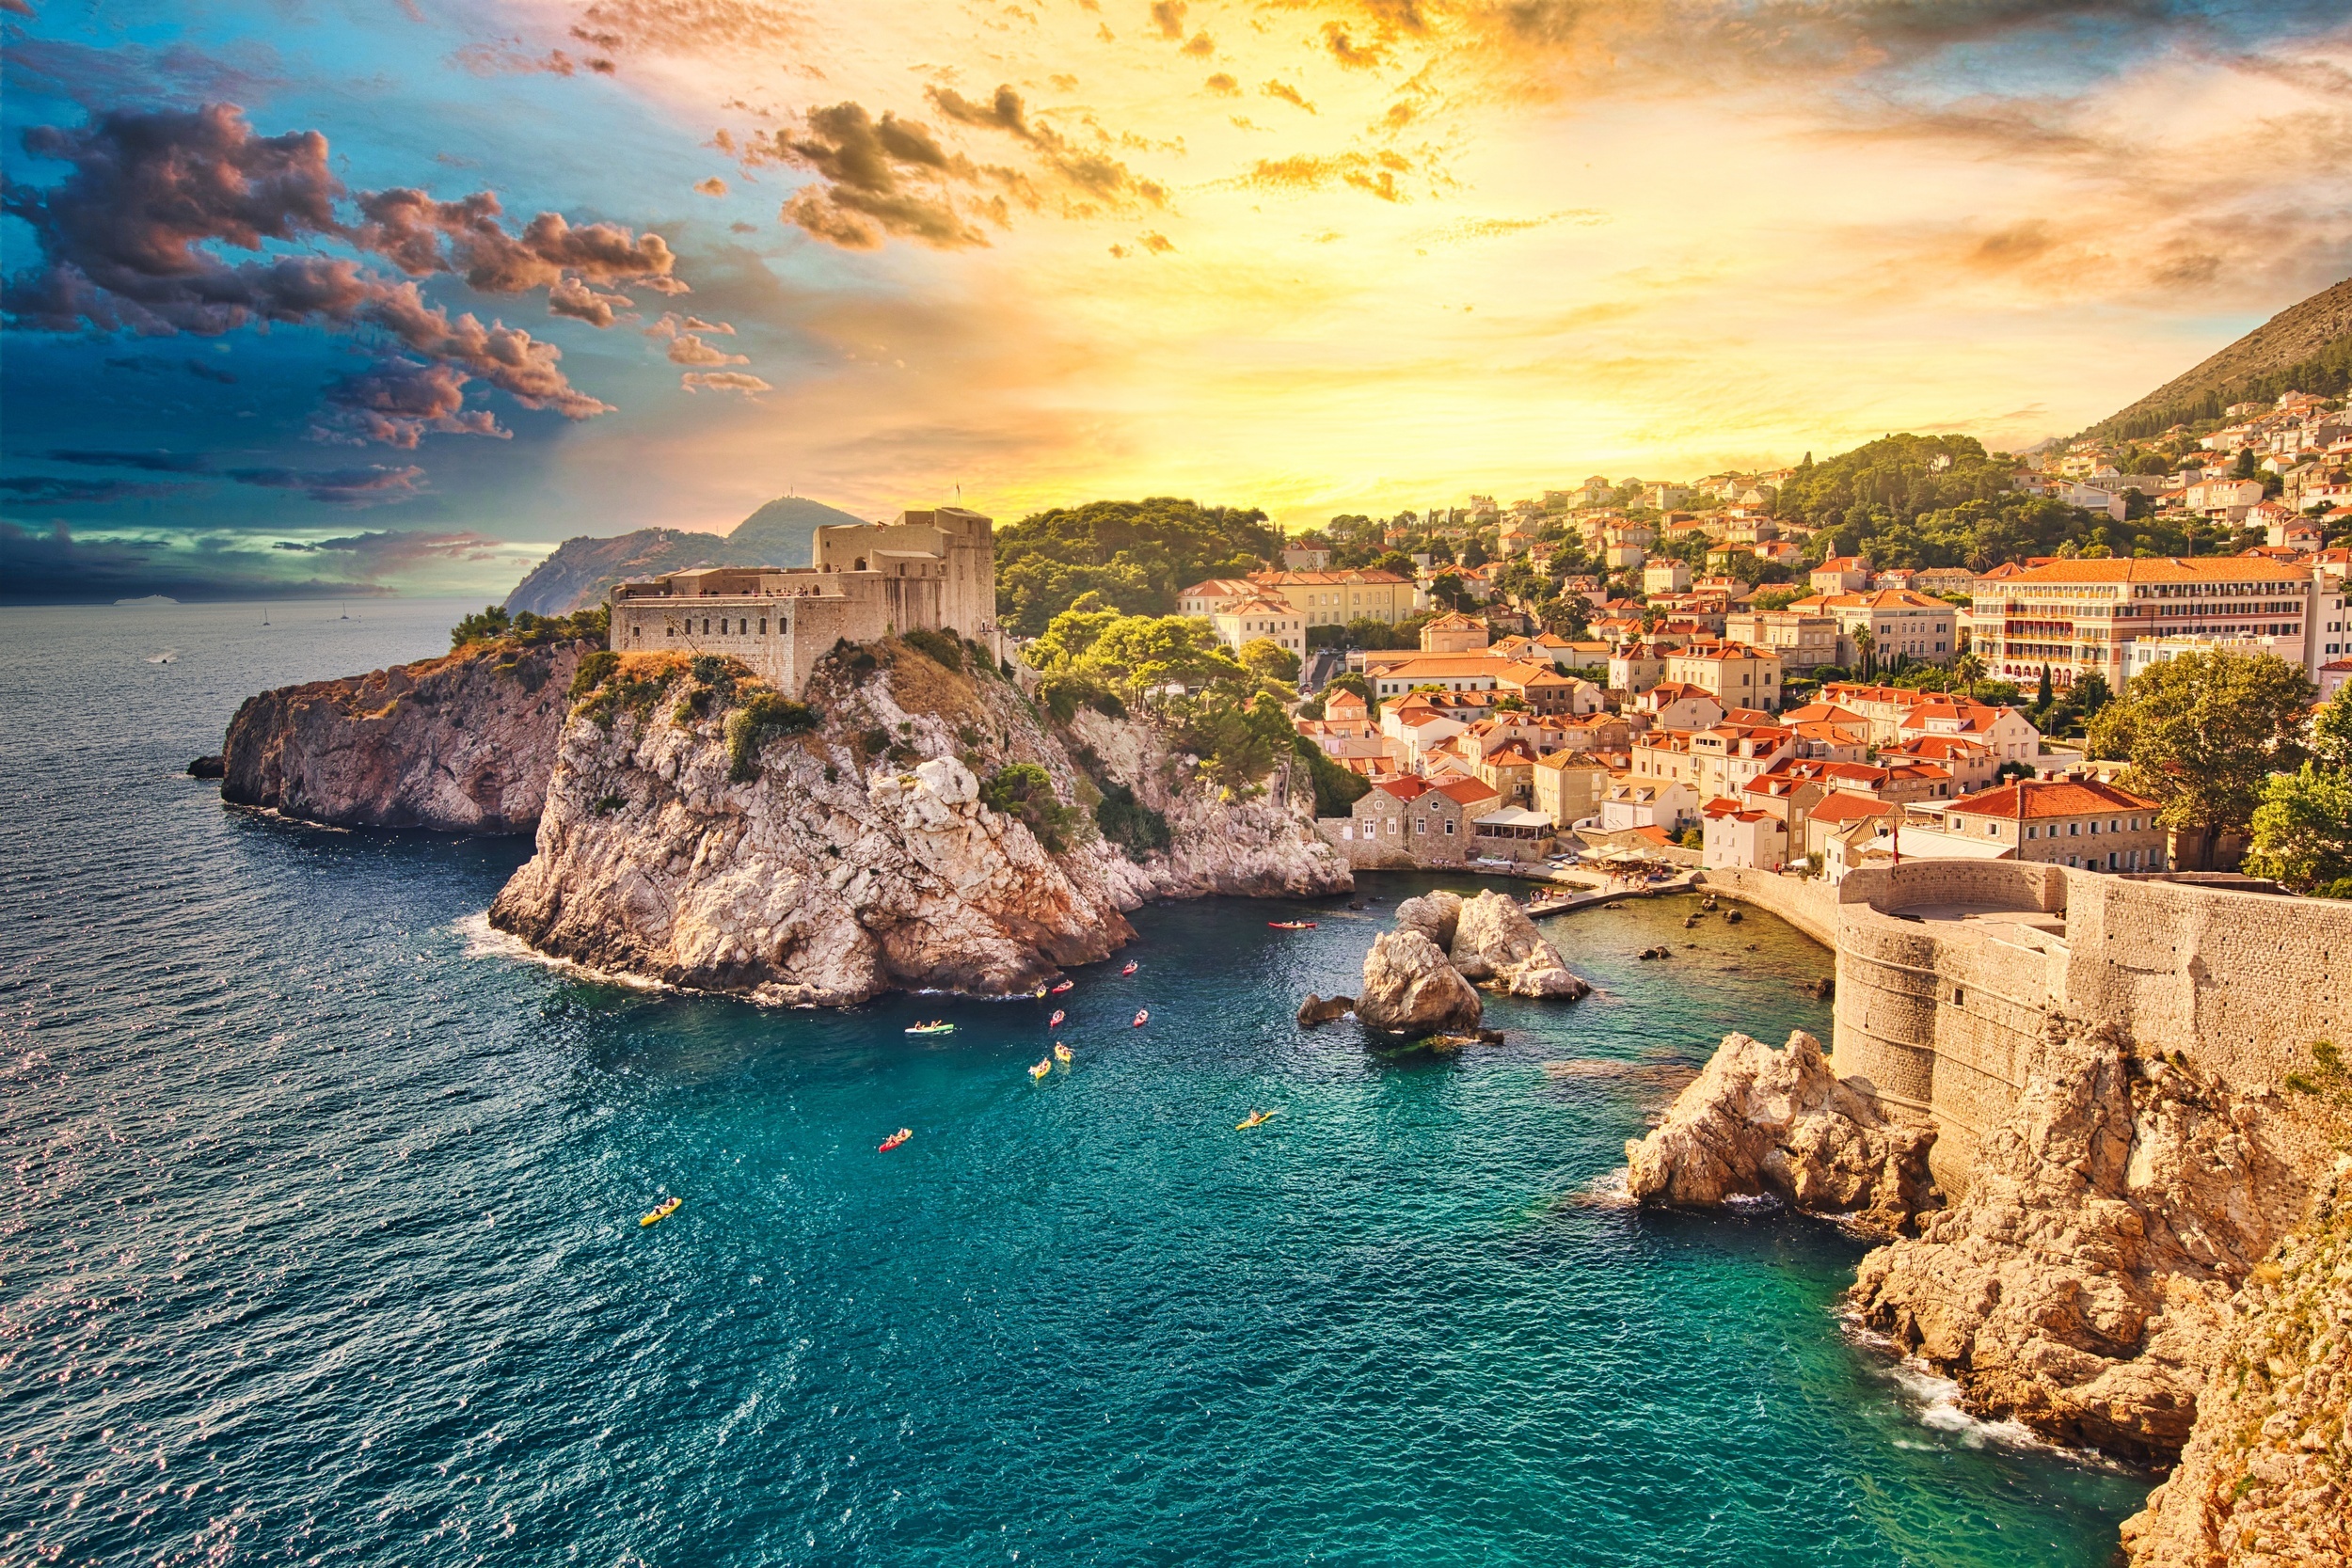 <p>This list, of course, couldn’t have been completed without mentioning arguably the most famous destination in the Balkans. <em>Game of Thrones</em> ensured the city is now on every traveler’s wishlist, so while you won’t ever have Dubrovnik to yourself, it’s still worth a visit. Enjoy views from atop the city walls, kayak around the hidden coves, and have dinner in the magical Old Town. </p><p>You may also like: <a href='https://www.yardbarker.com/lifestyle/articles/24_must_visit_destinations_in_the_south_of_france/s1__40103992'>24 must-visit destinations in the South of France</a></p>